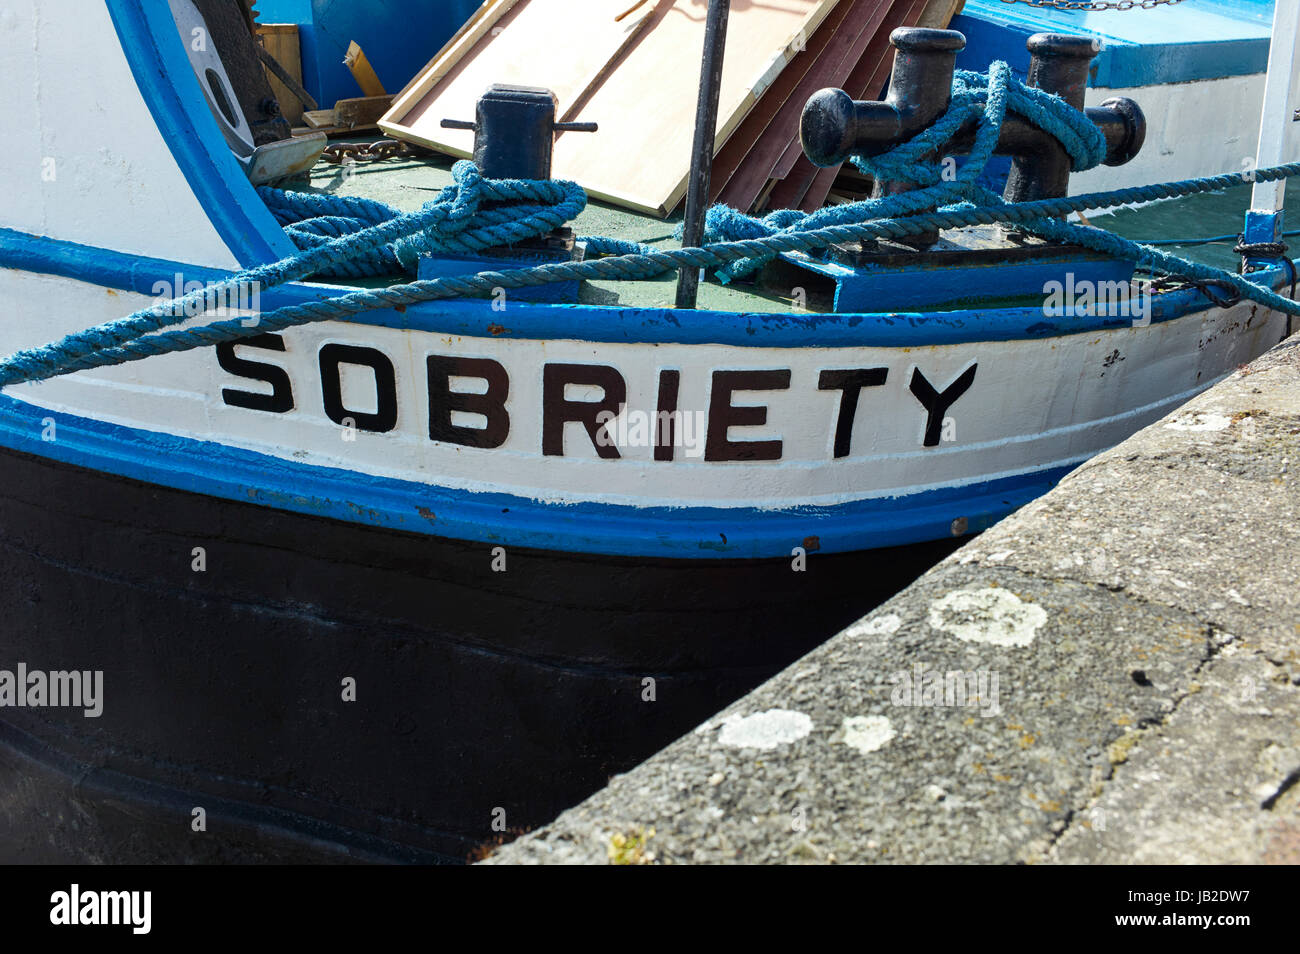 Sobriety barge in Hull docks Stock Photo